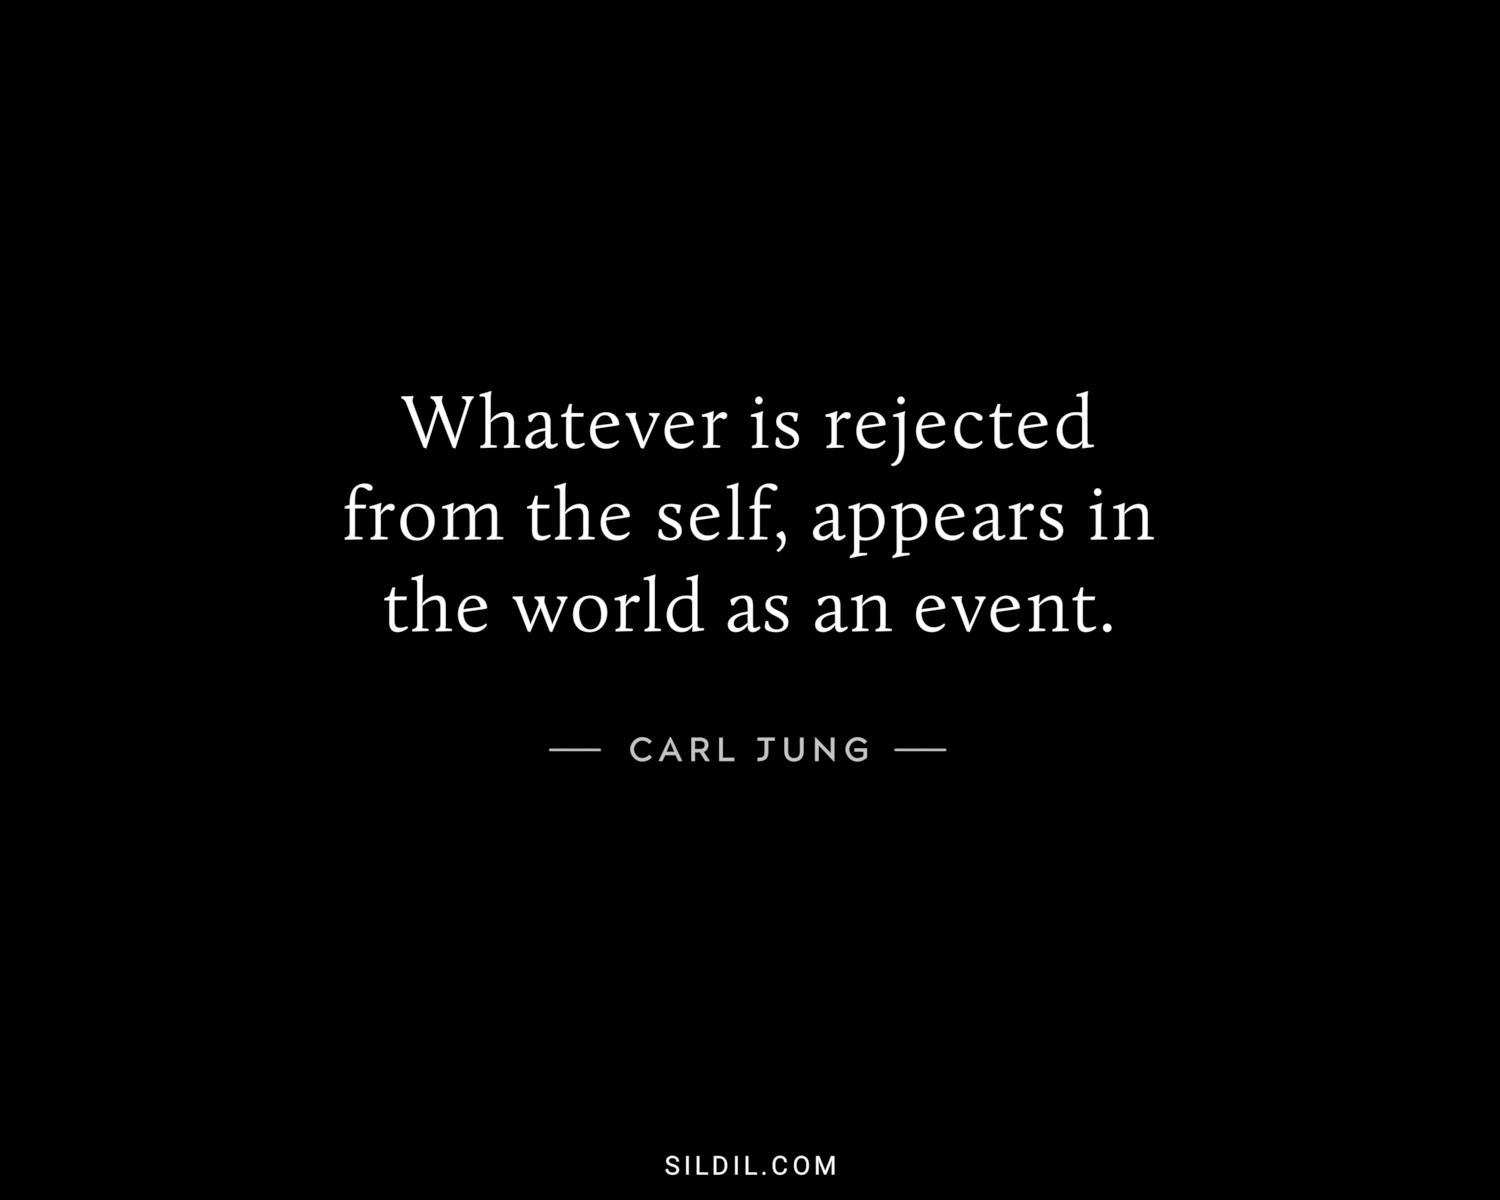 Whatever is rejected from the self, appears in the world as an event.